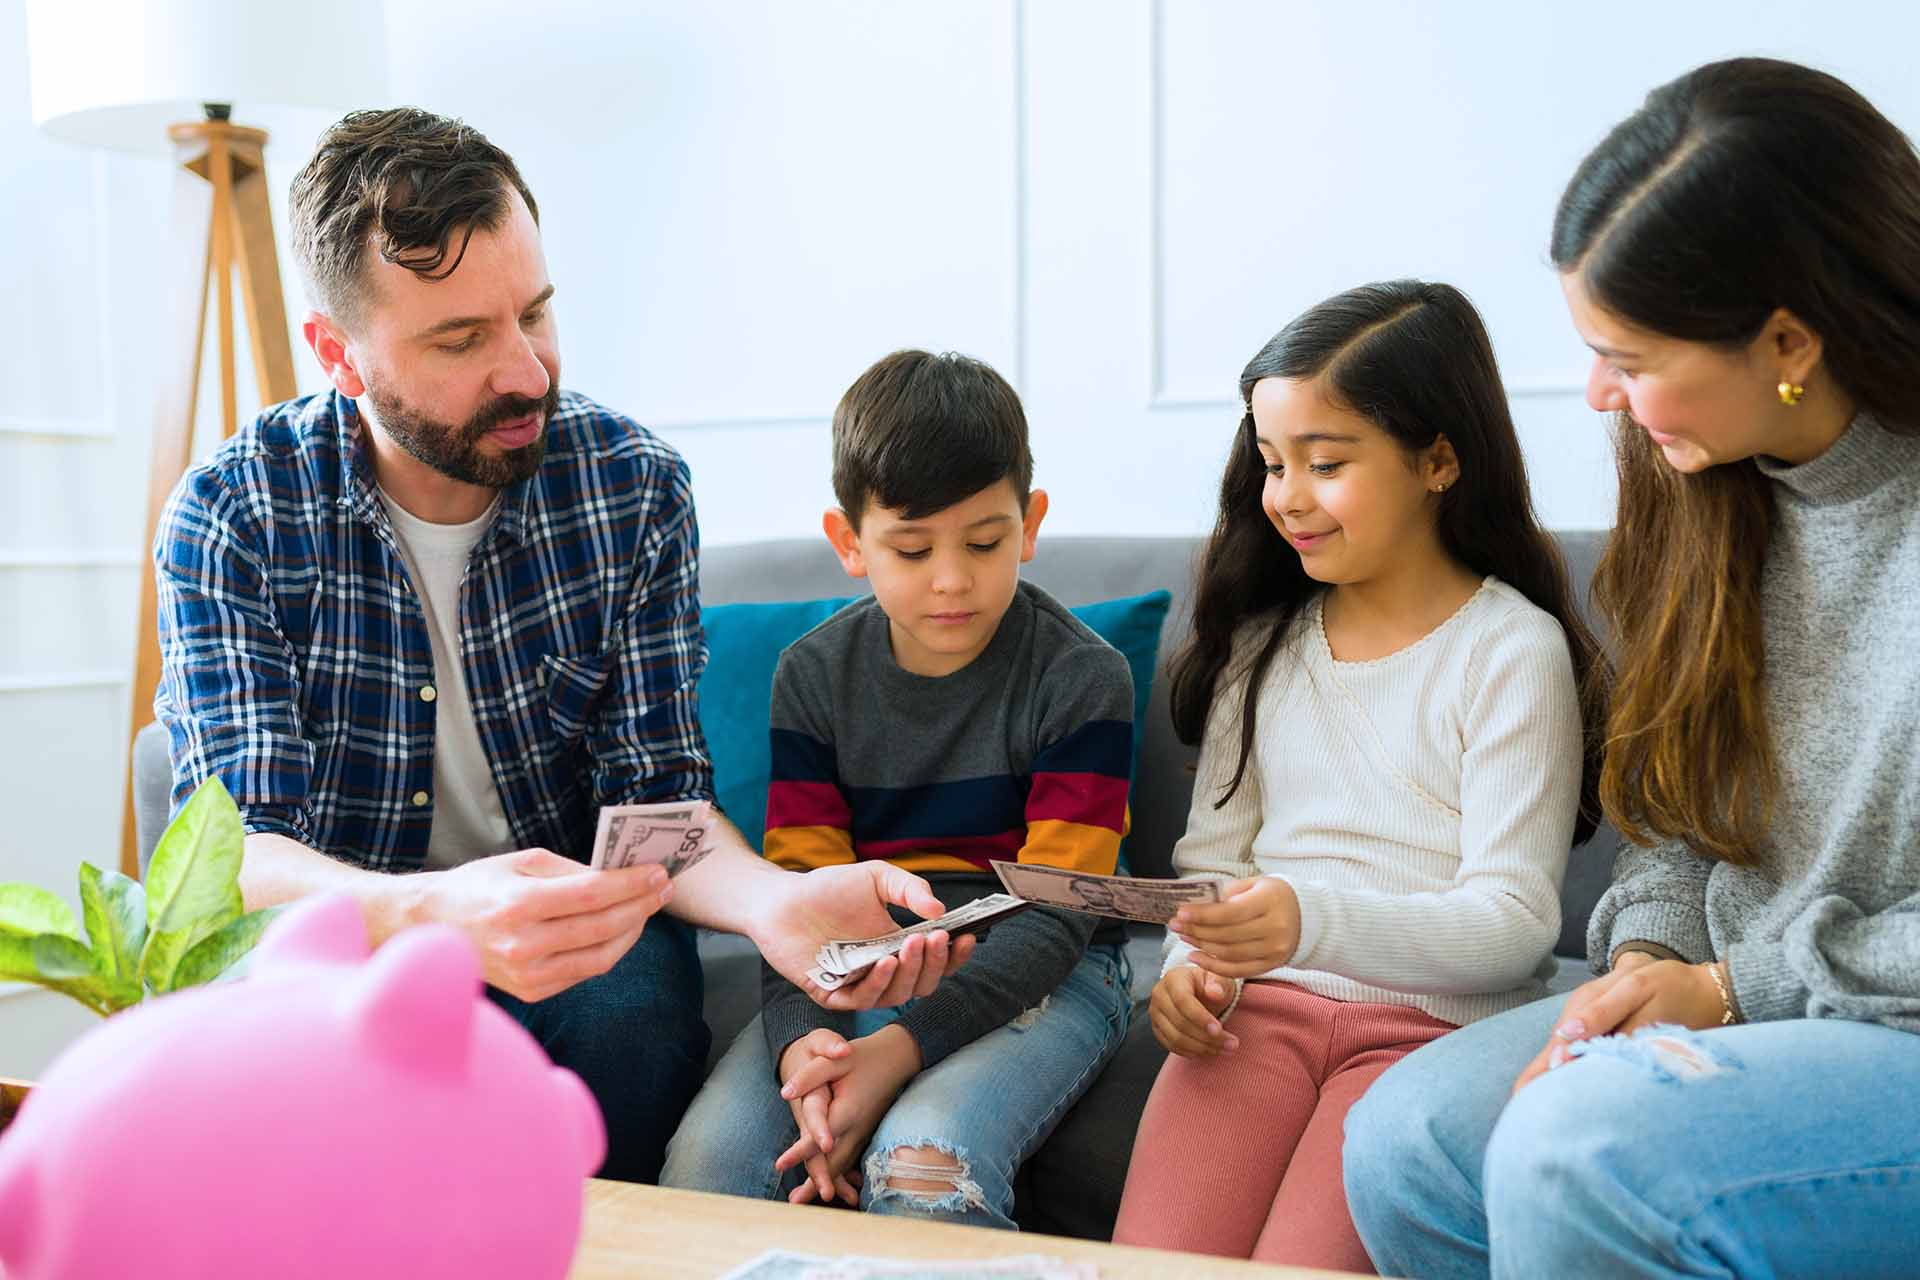 Parents sitting on couch with young children and handing them their allowance